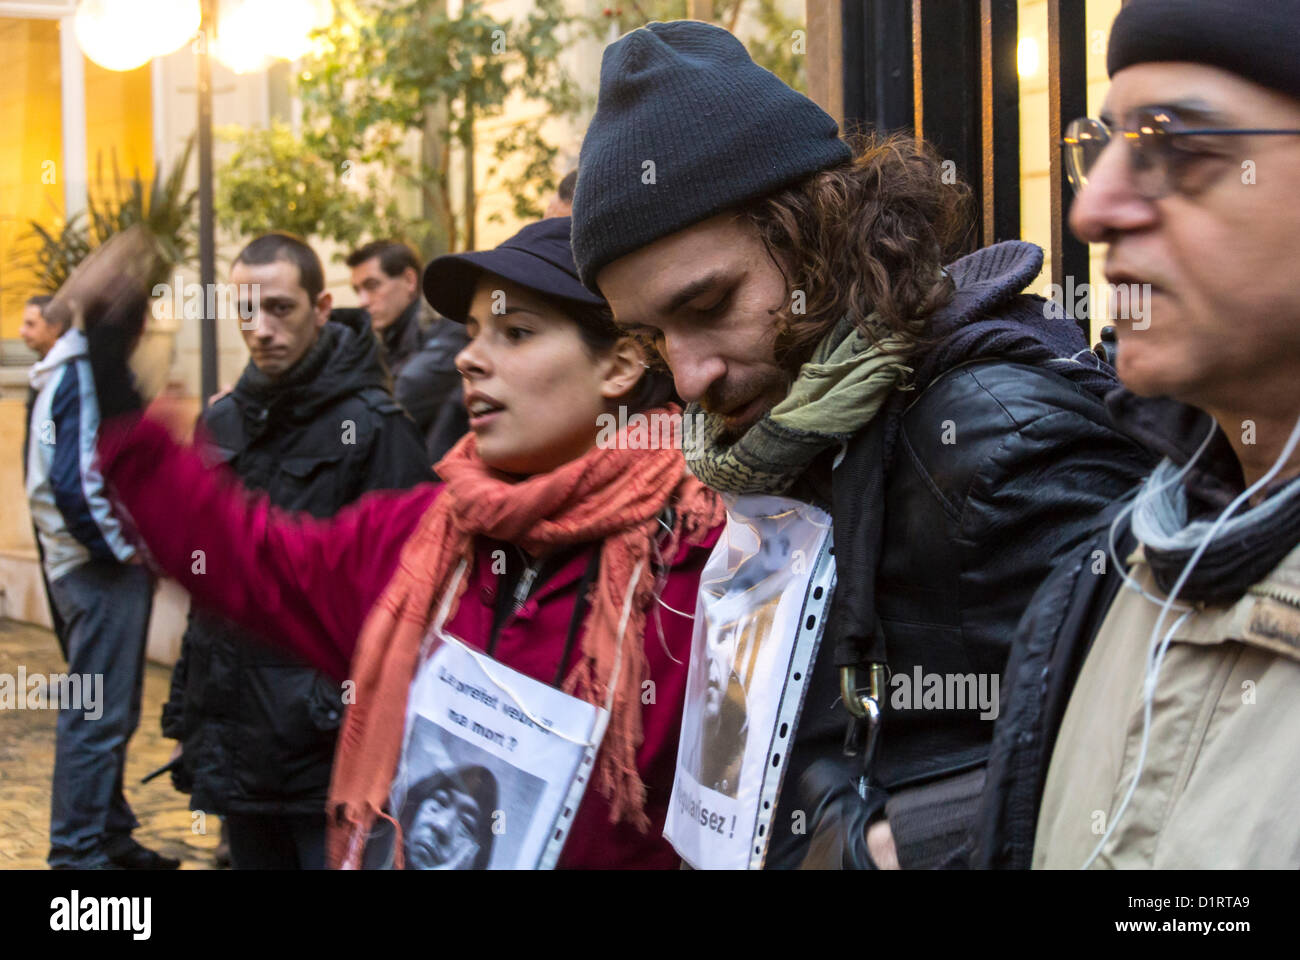 Paris, France, 'Sans Papiers' Protesting Fre-nch Government, at Socialist Par-ty headquarters, Activists Chained Themselves to Front Gate, anti immigration law protest, immigrants rights Stock Photo